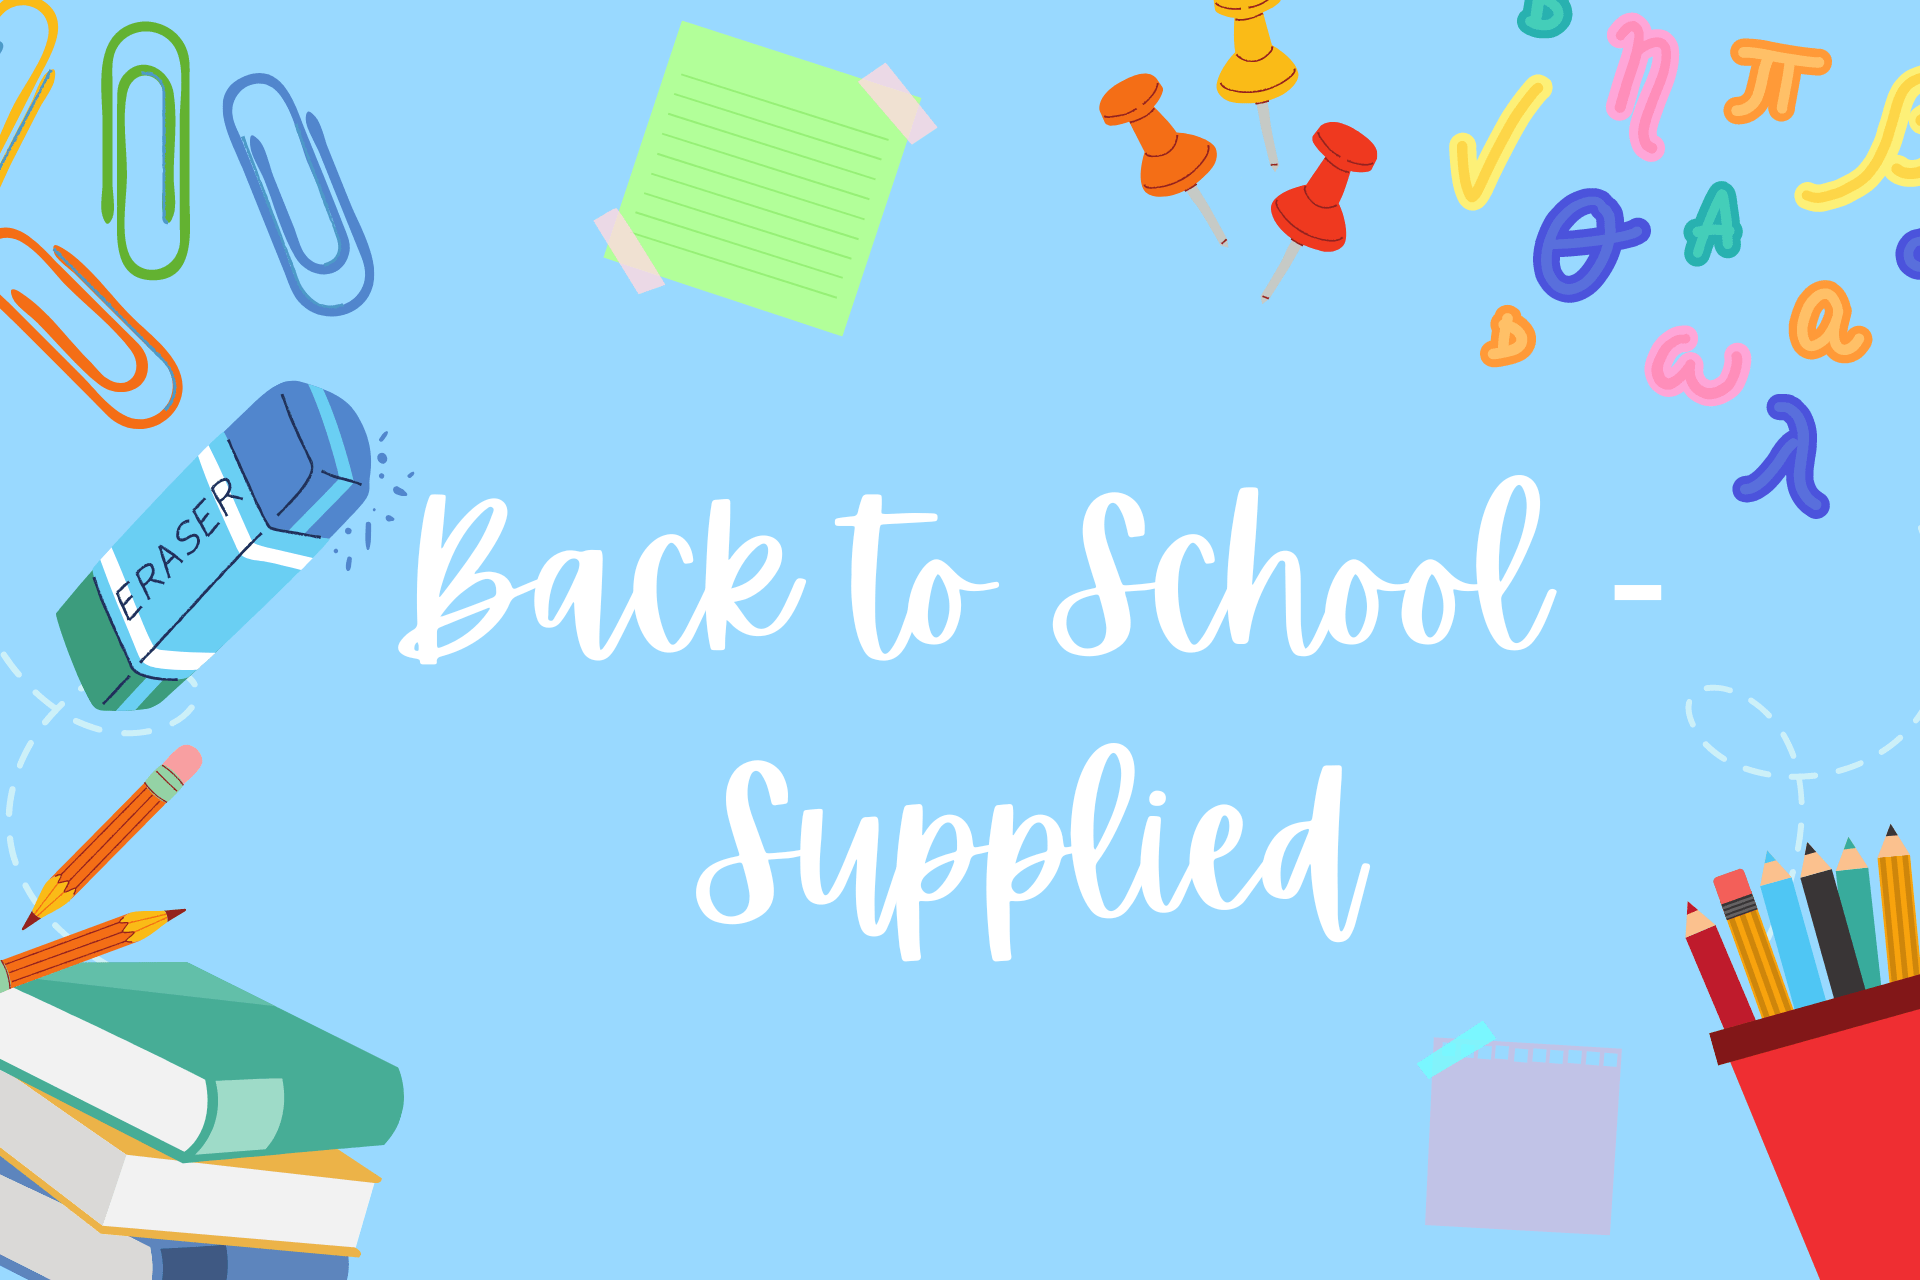 JBSA Community Programs offers free school supplies at Back to